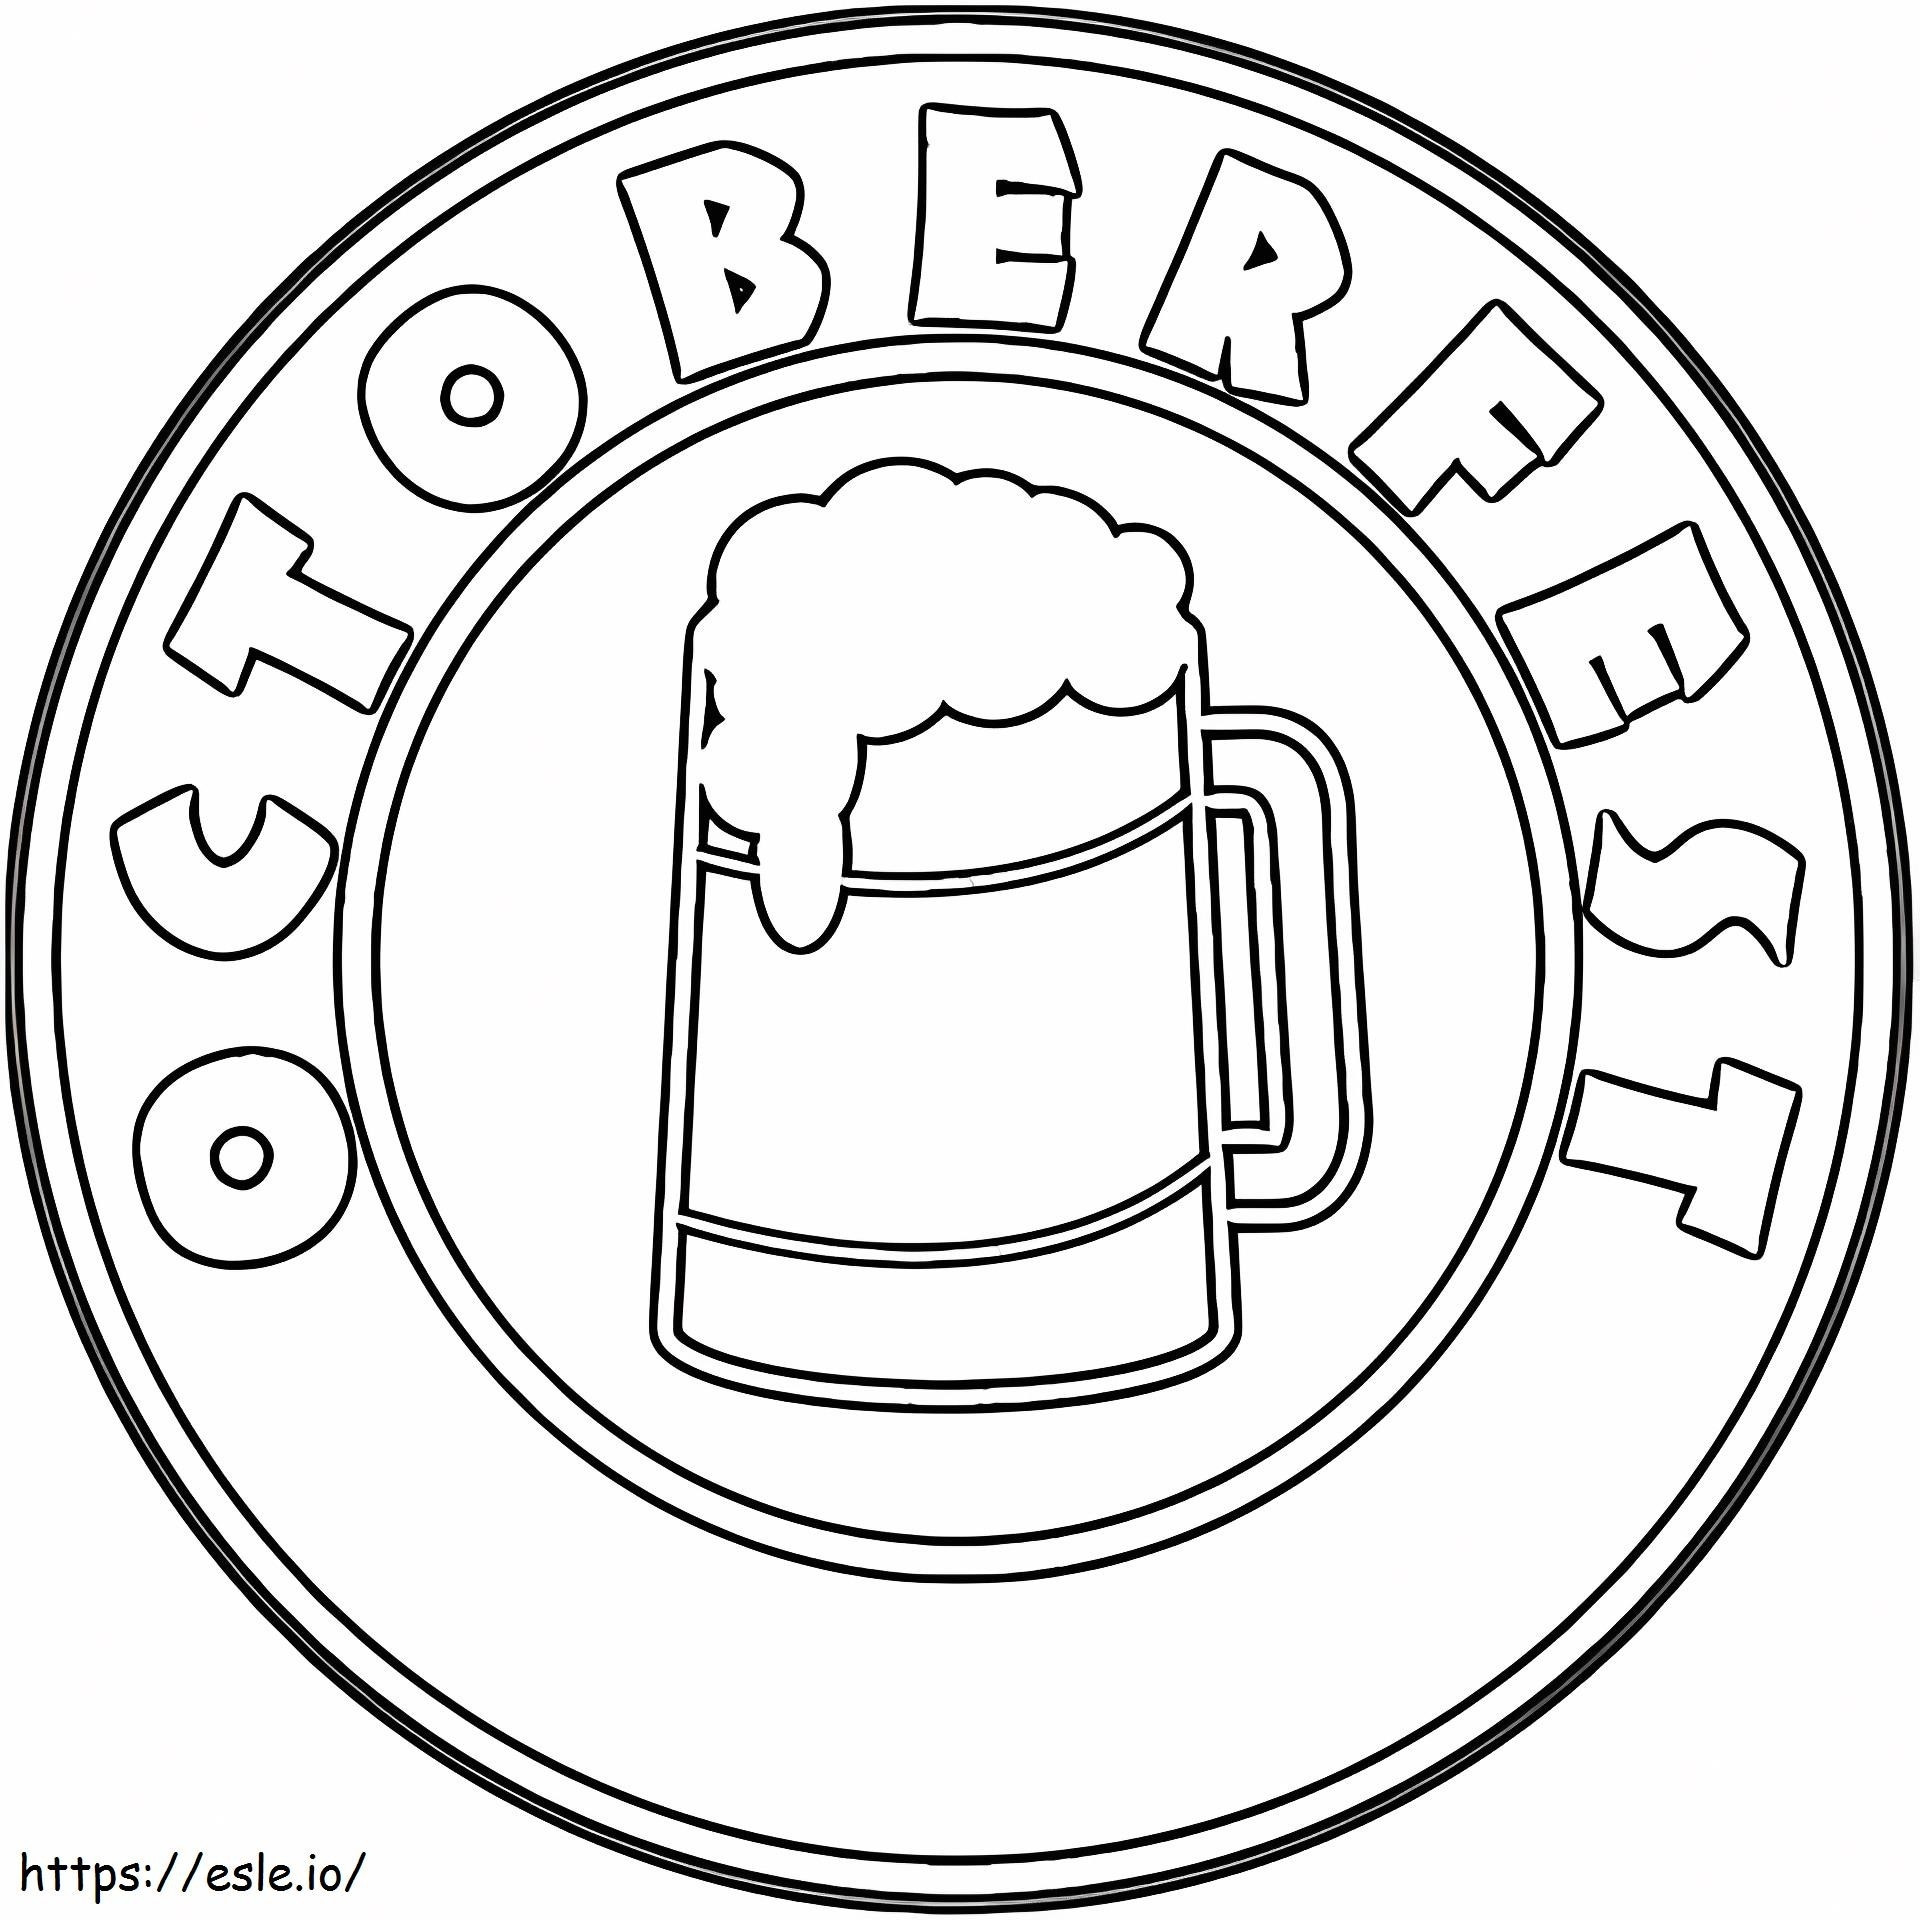 1527061317_Oktoberfest coloring page